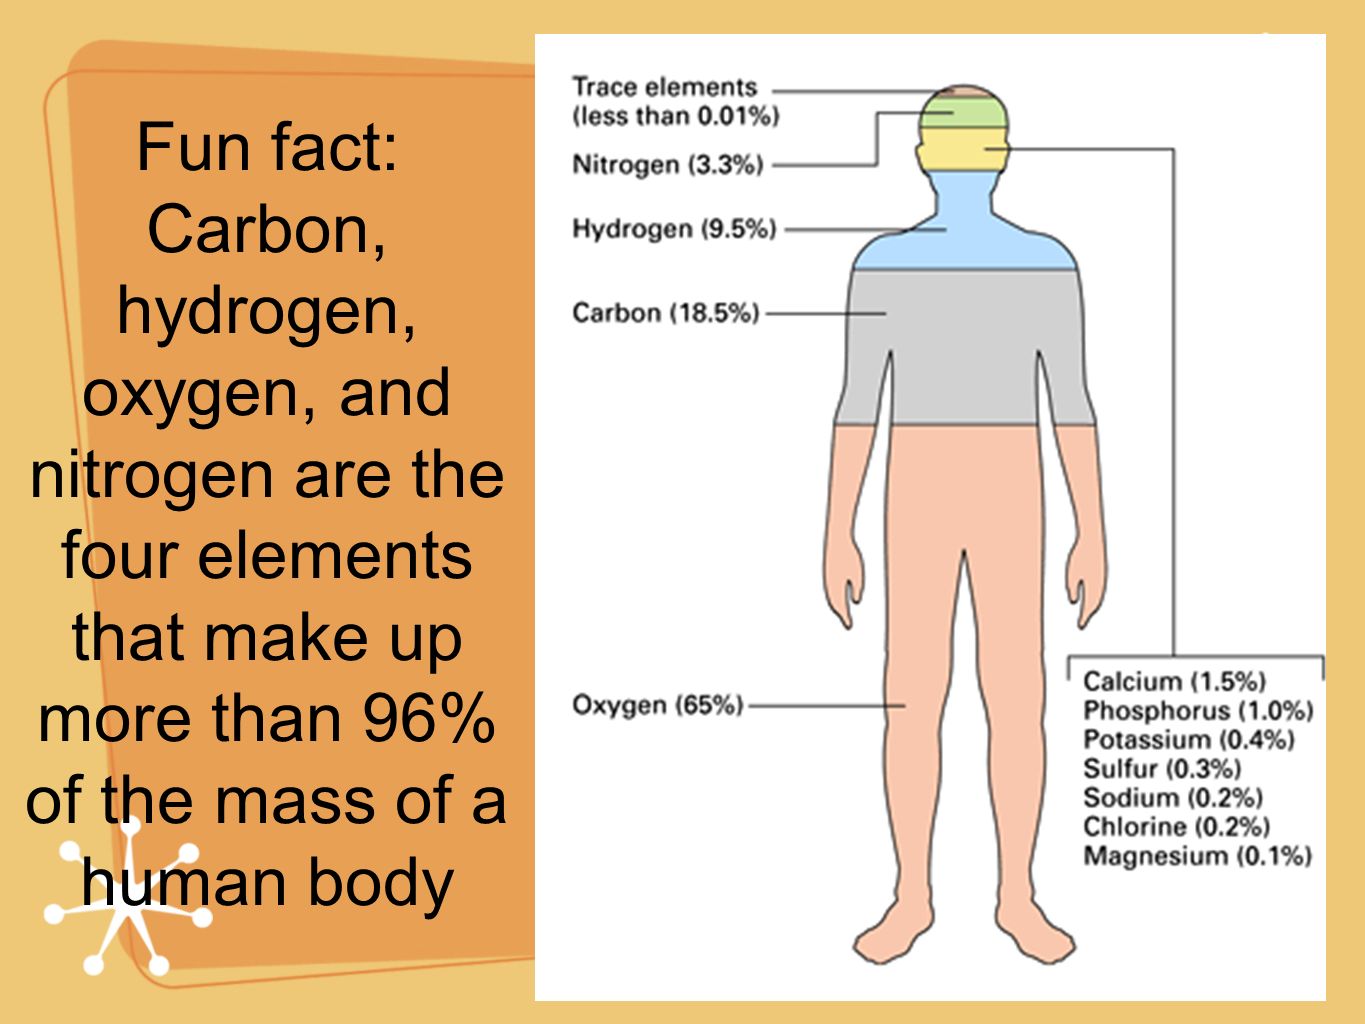 Fun fact: Carbon, hydrogen, oxygen, and nitrogen are the four elements that make up more than 96% of the mass of a human body